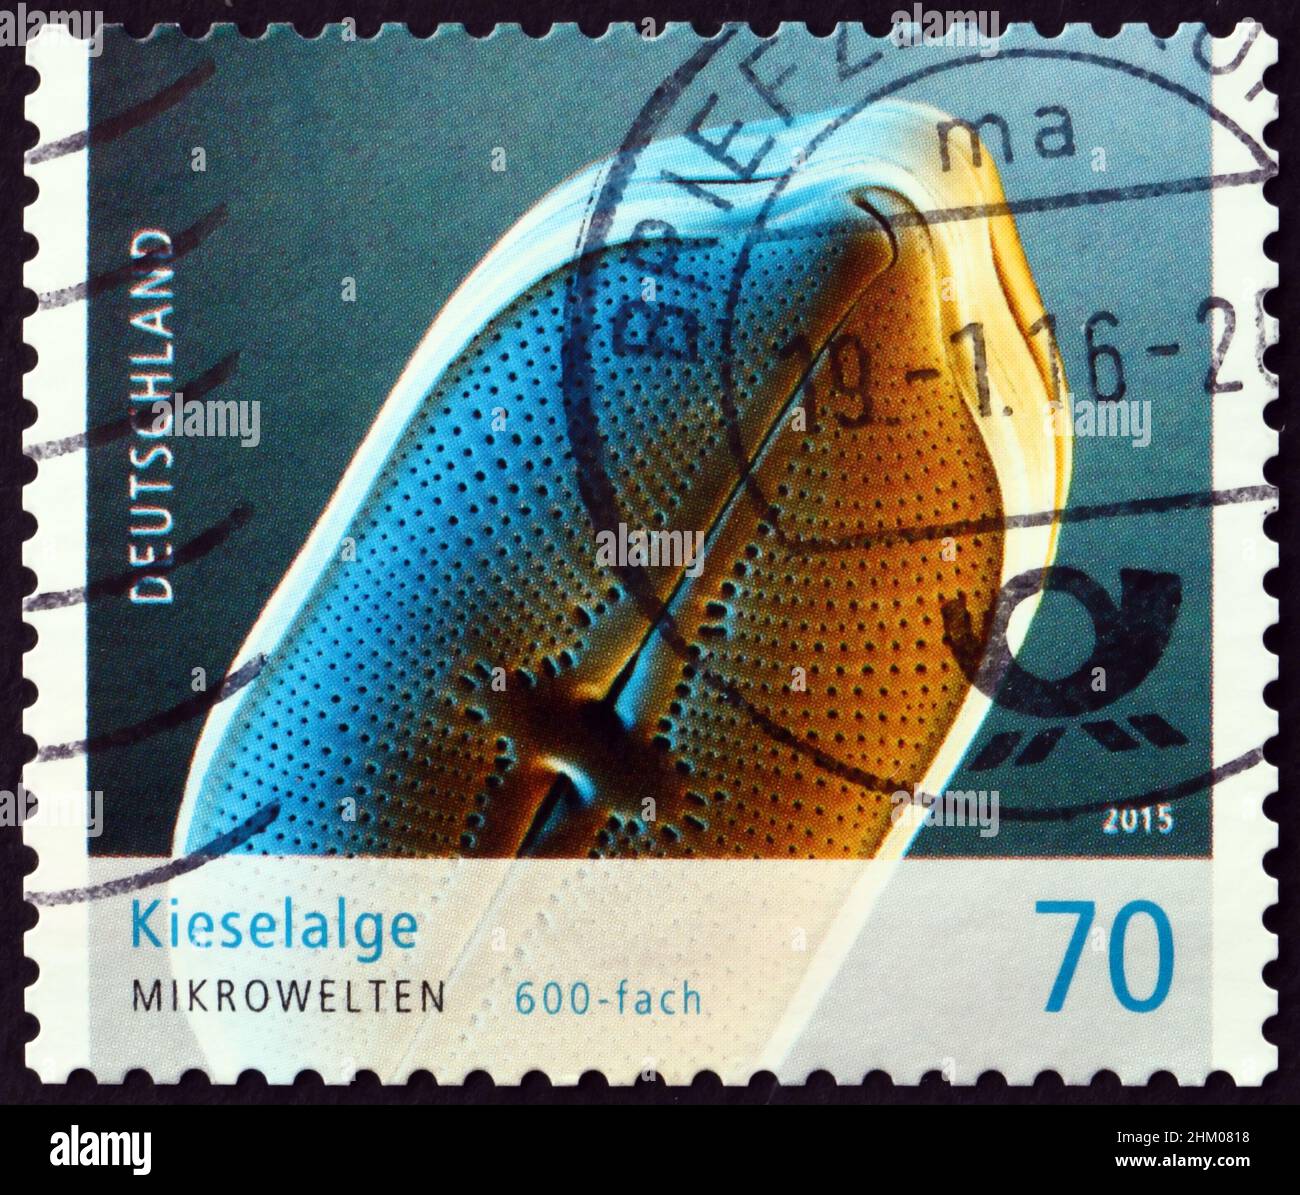 GERMANY - CIRCA 2015: a stamp printed in Germany shows diatom, microalgae found in the oceans, waterways and soils of the world, circa 2015 Stock Photo